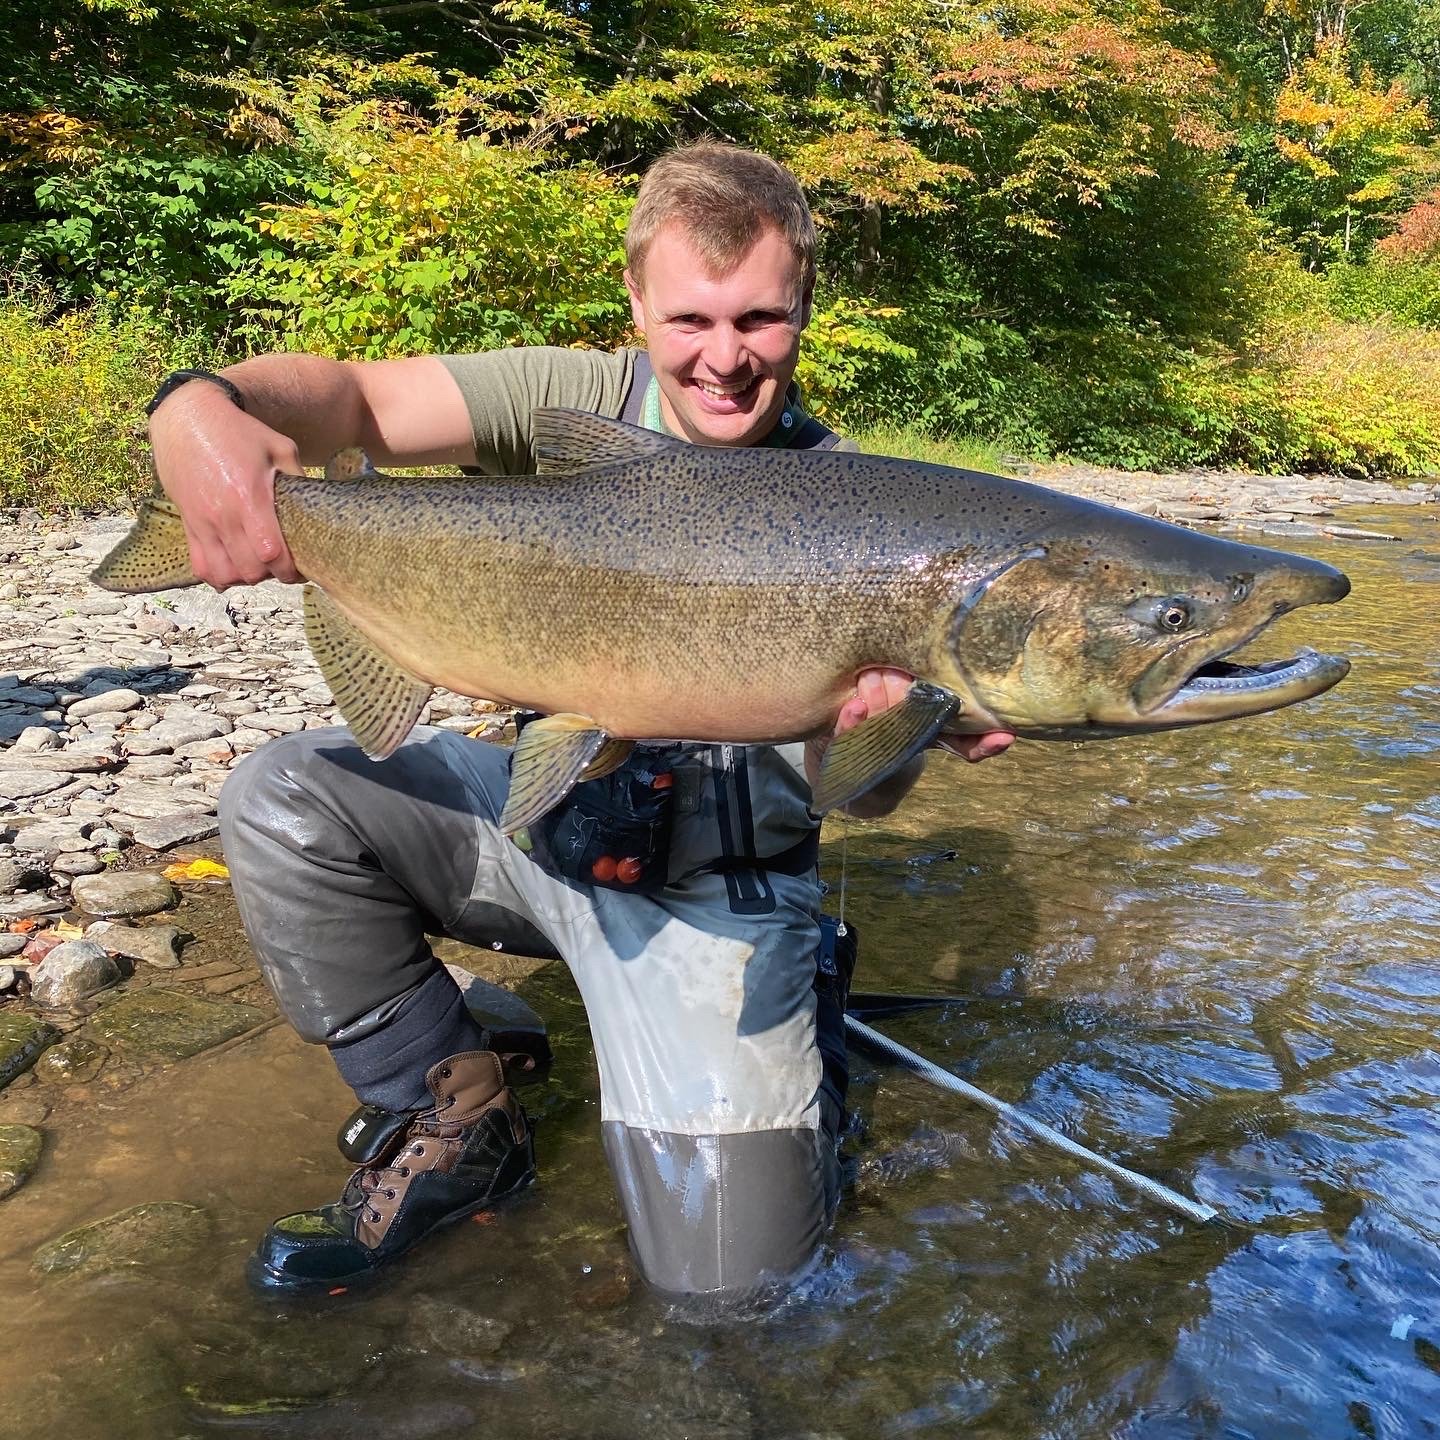 Fly Fishing The Salmon River In New York: Part 2 - Gear To Use